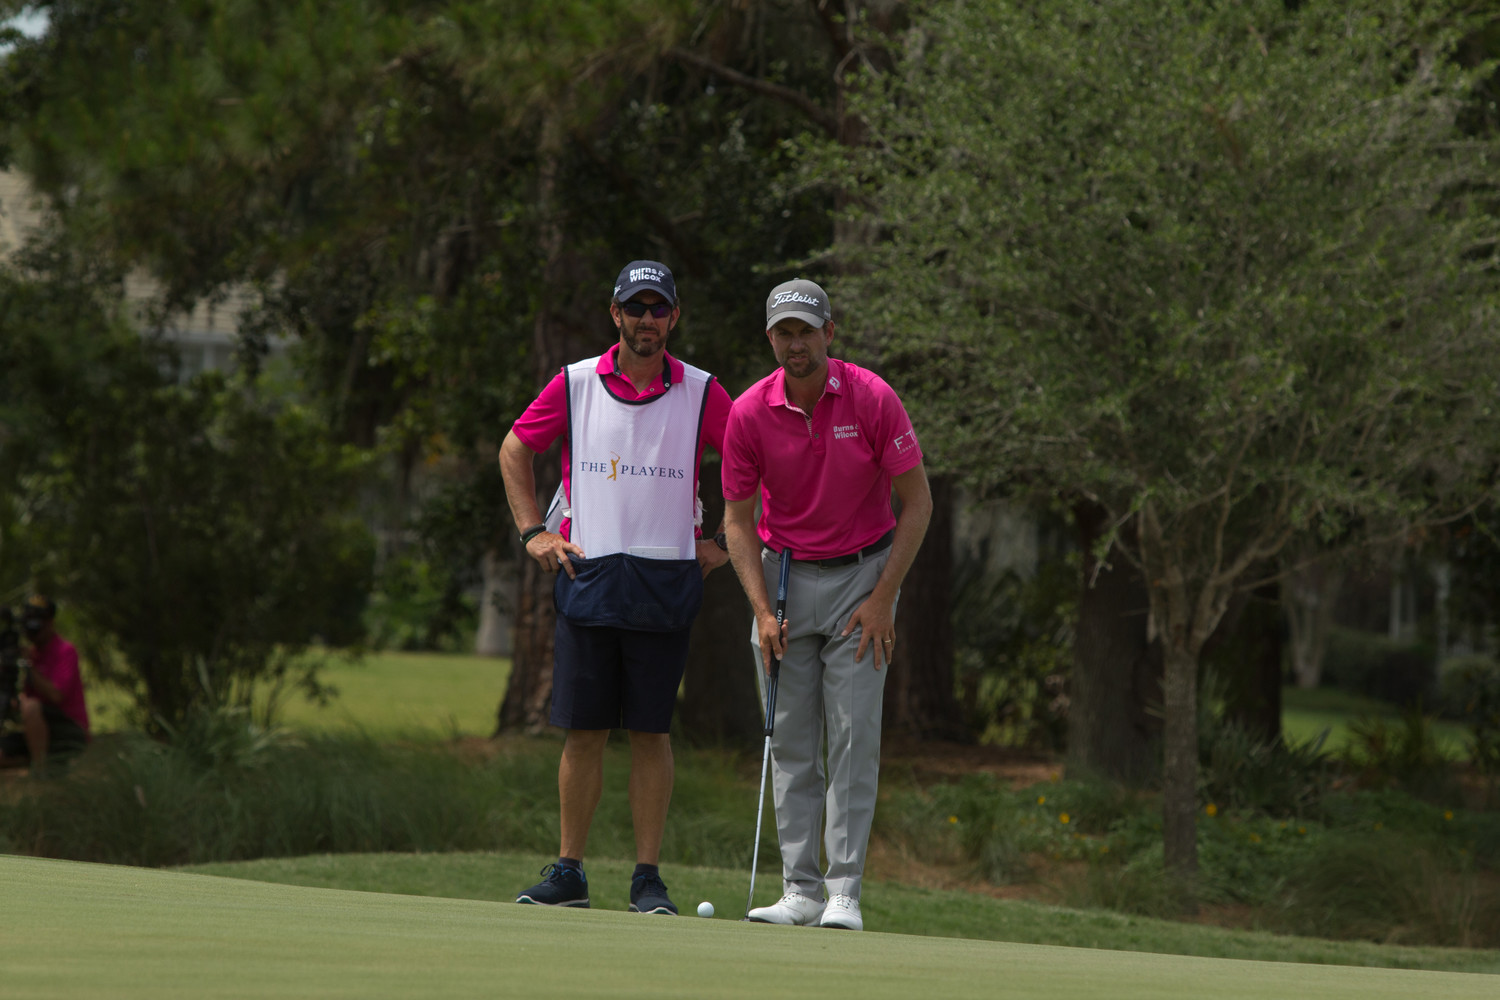 Paul Tesori, the caddie for THE PLAYERS Championship 2018 winner Webb Simpson and a Nocatee resident, surveys the field with Simpson during the final round of the tournament.